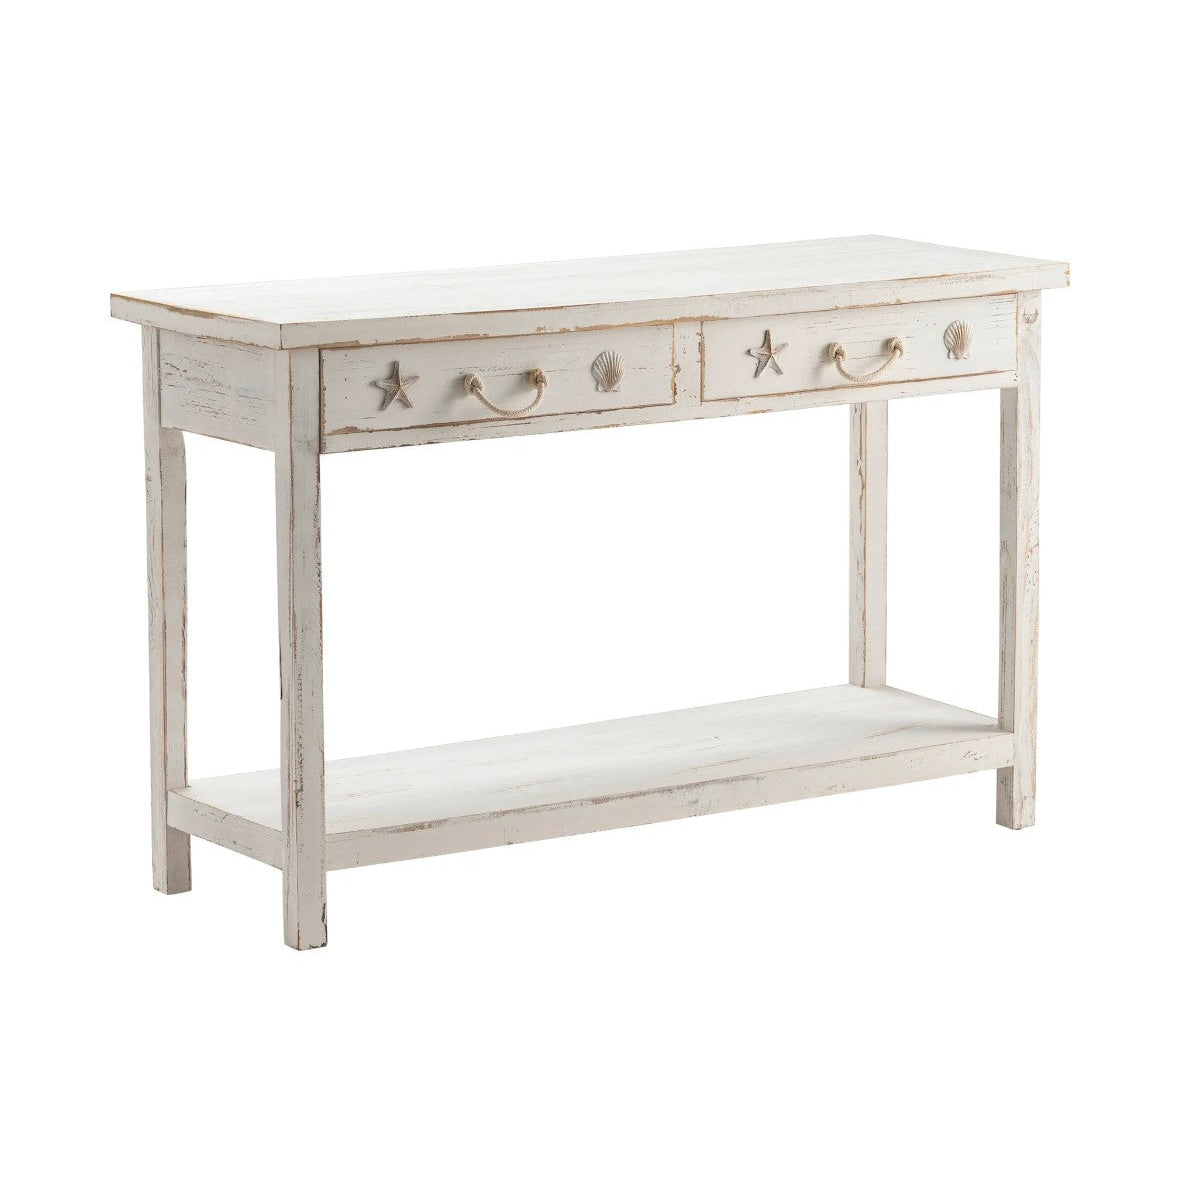 Crestview Collection Seaside 50" x 18" x 32" Coastal Wood Console Table In White Finish